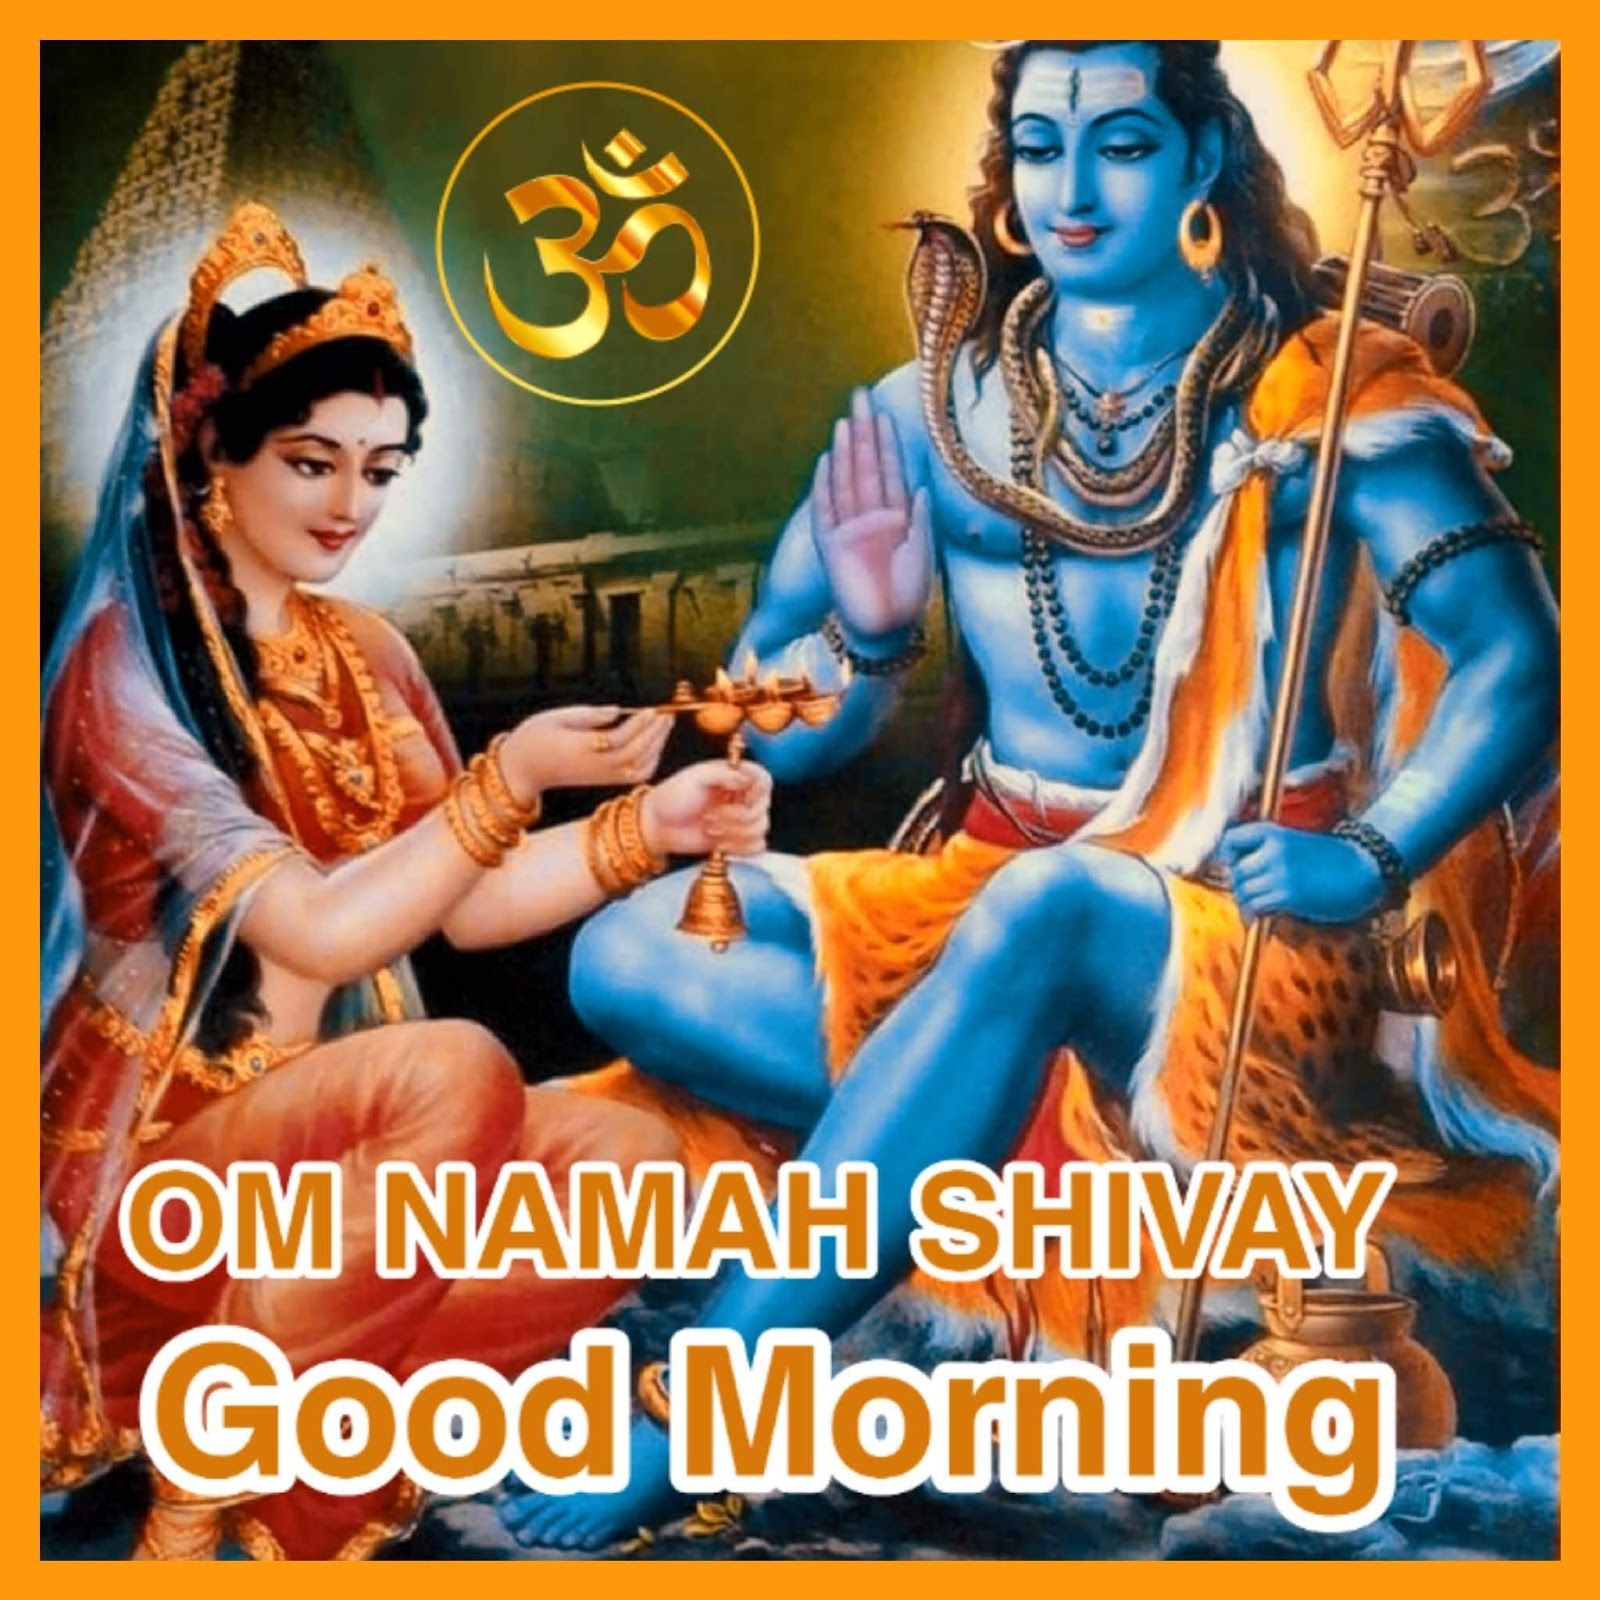 Good morning lord shiva image with shubh somvar picture wallpaper download wishes image